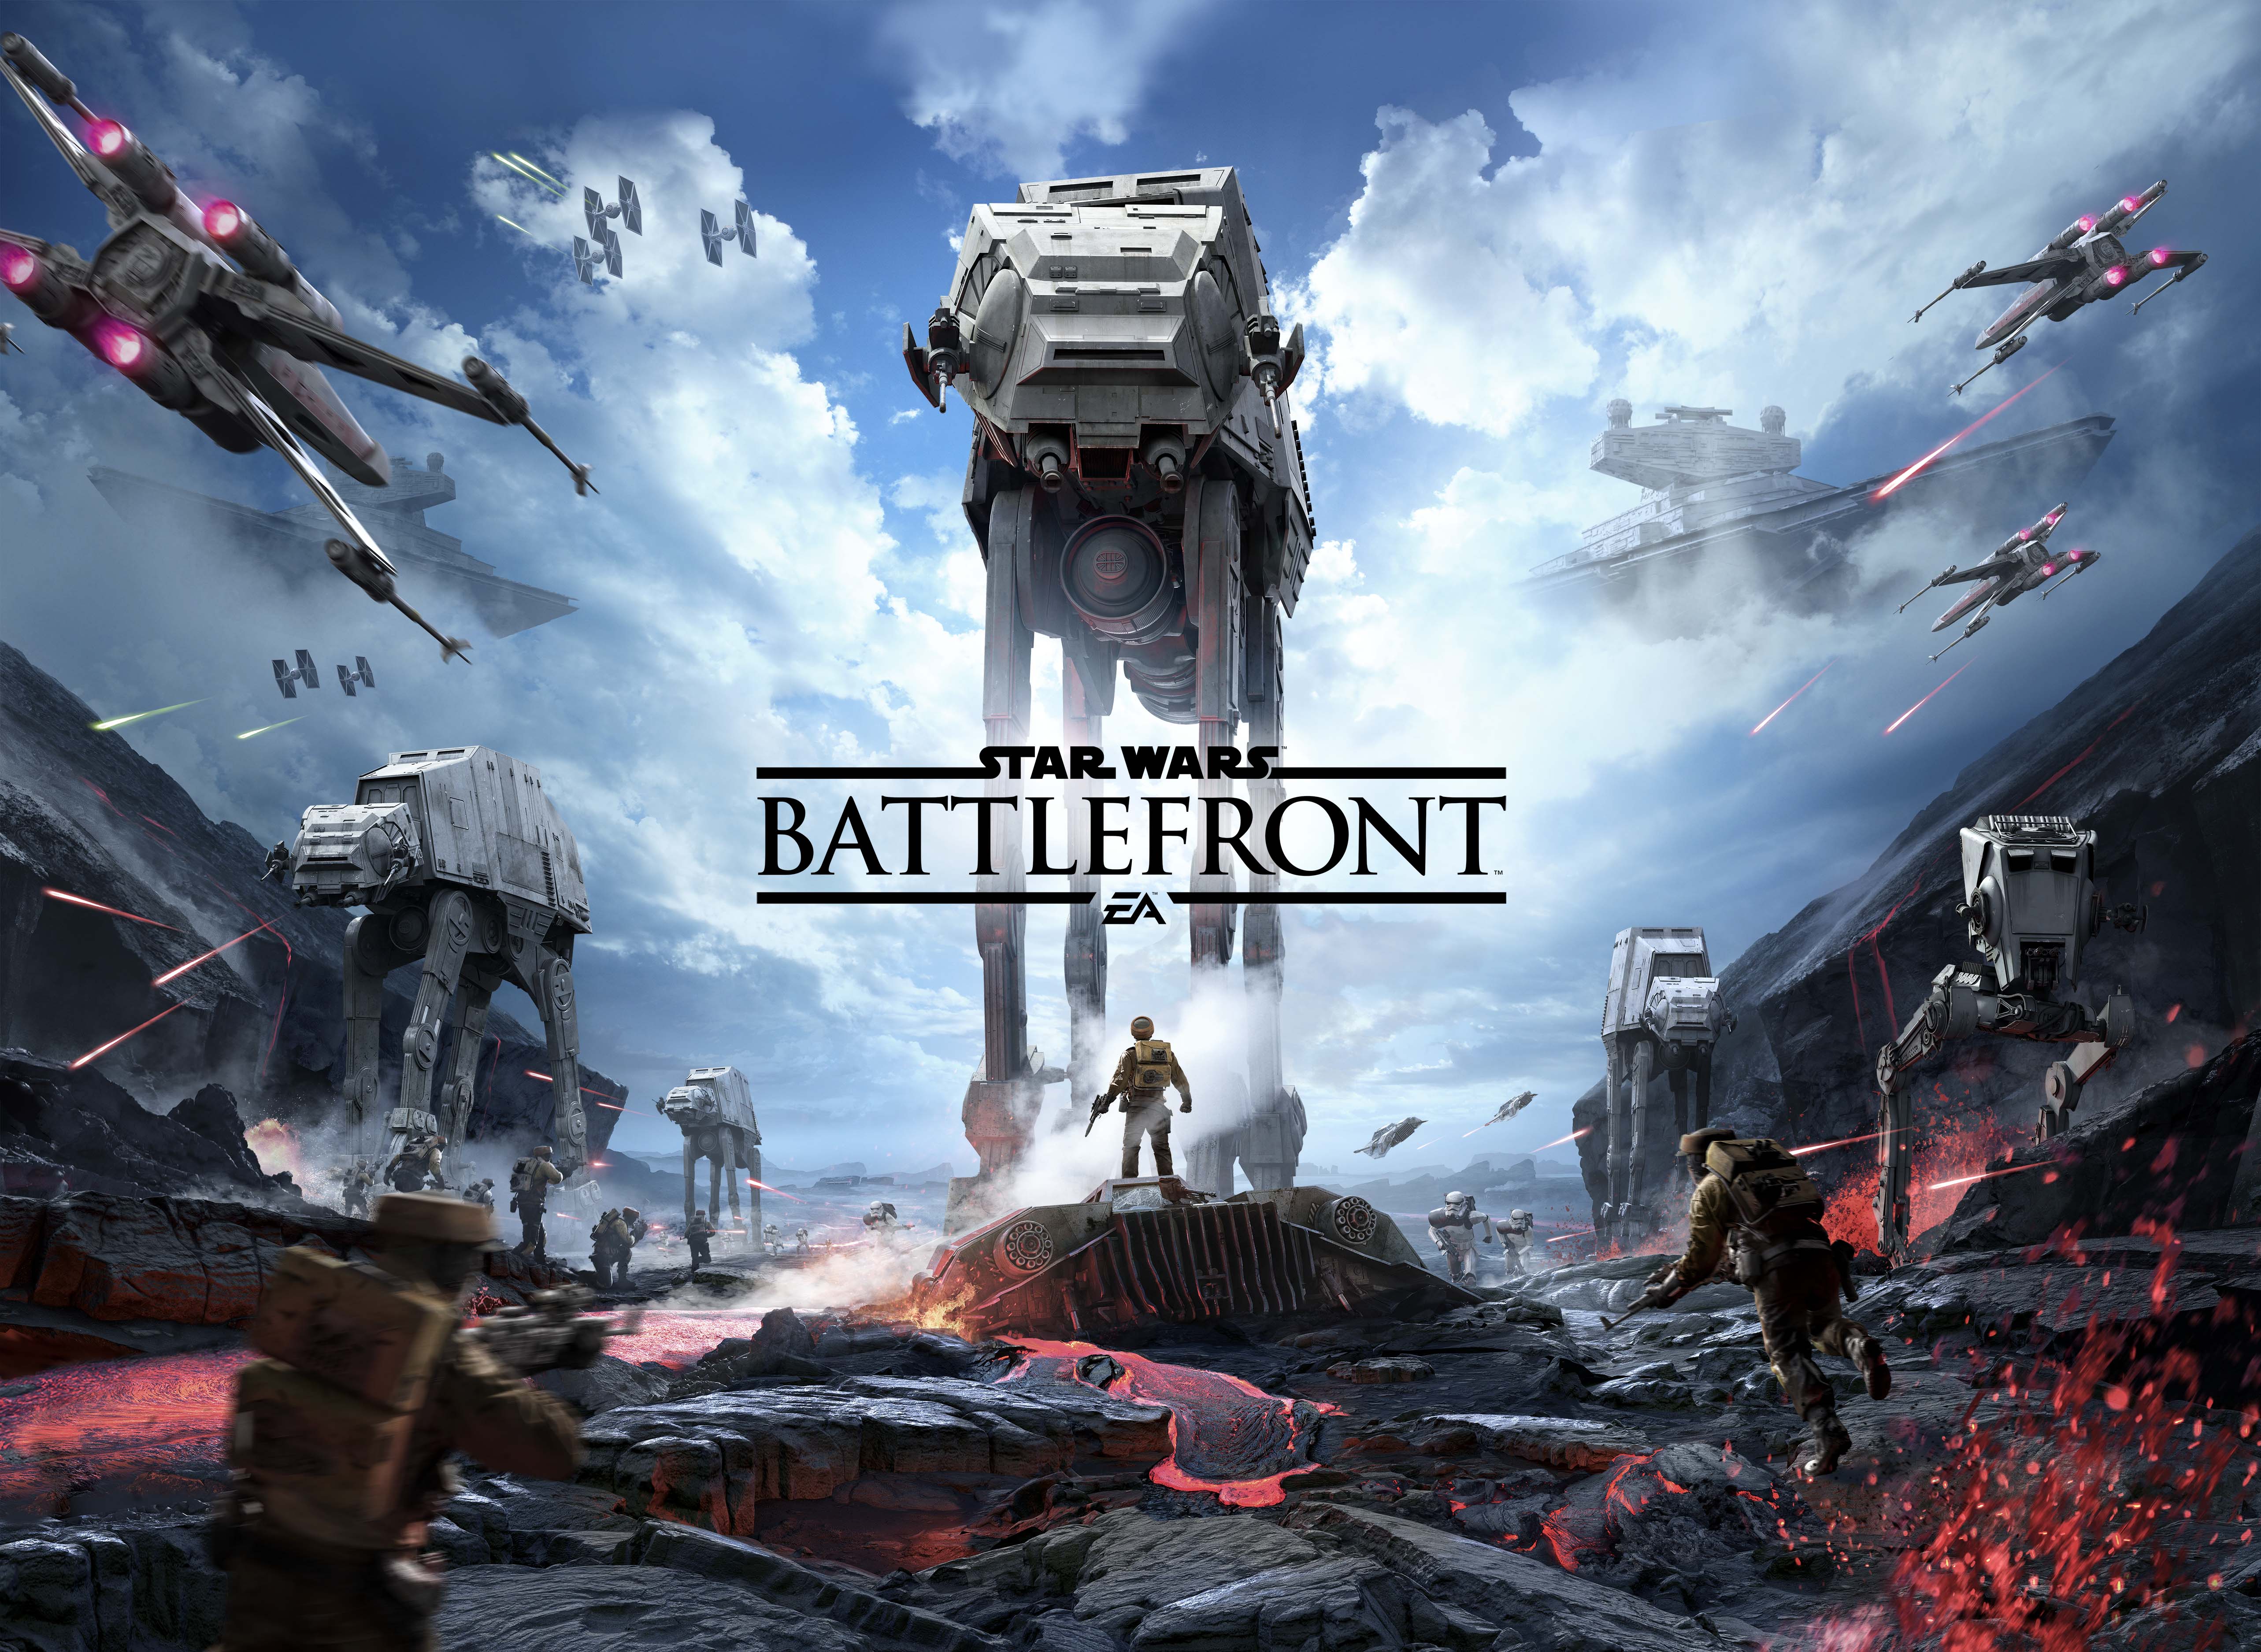 150+ Star Wars Battlefront (2015) HD Wallpapers and Backgrounds